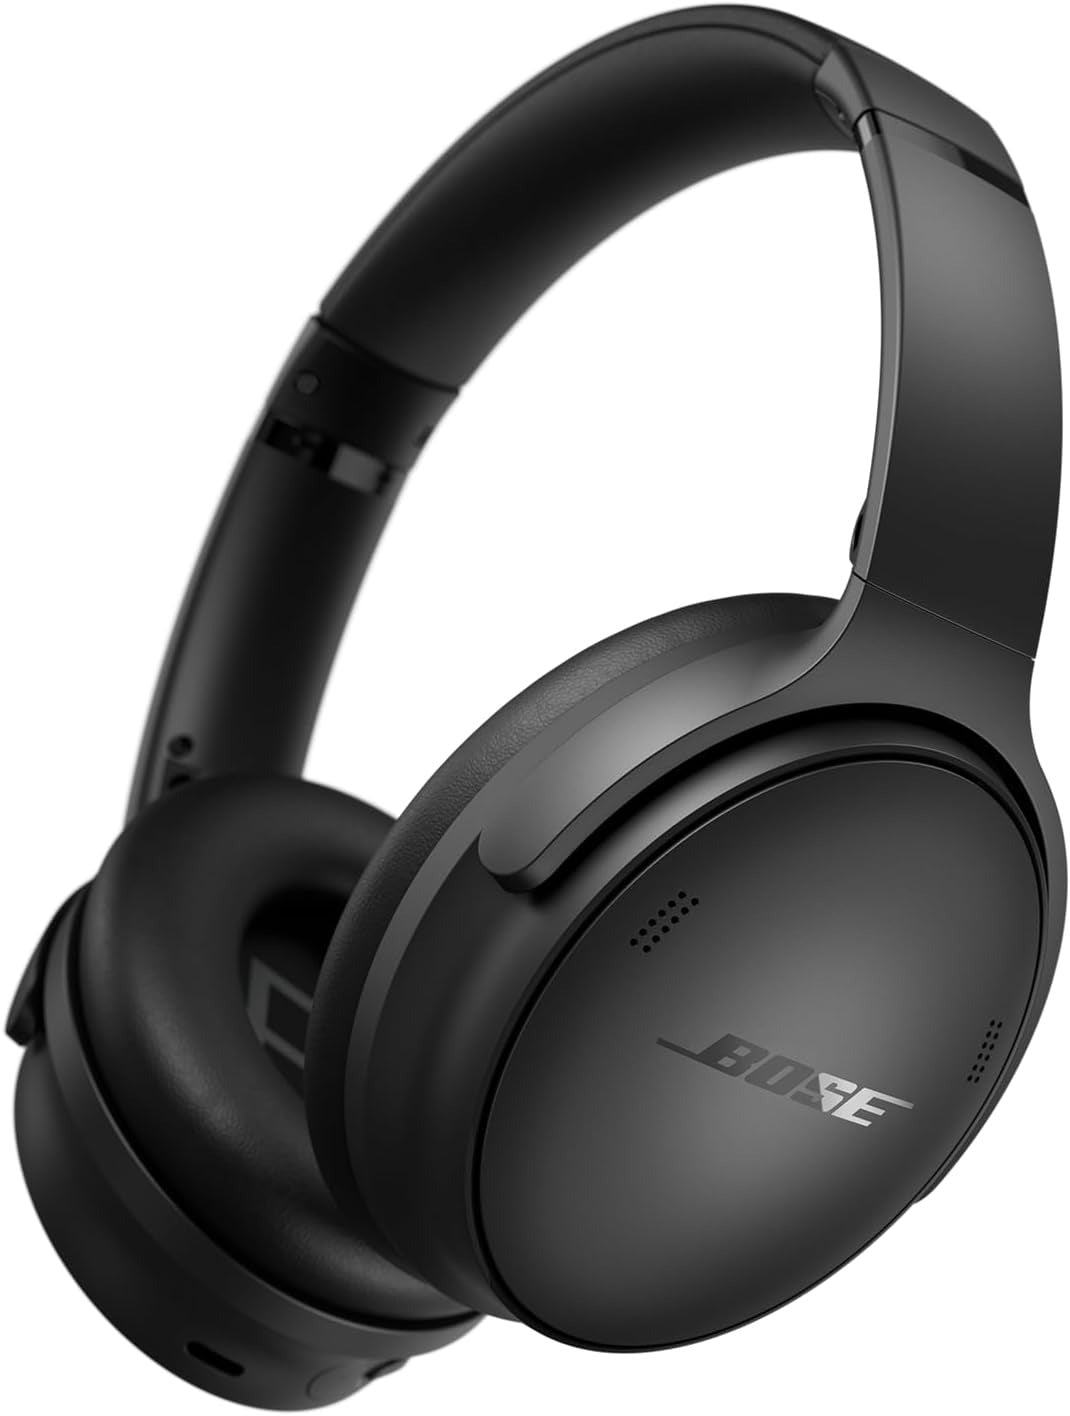 Bose QuietComfort Wireless Noise Cancelling Over-the-Ear Headphones - Black (Certified Refurbished)